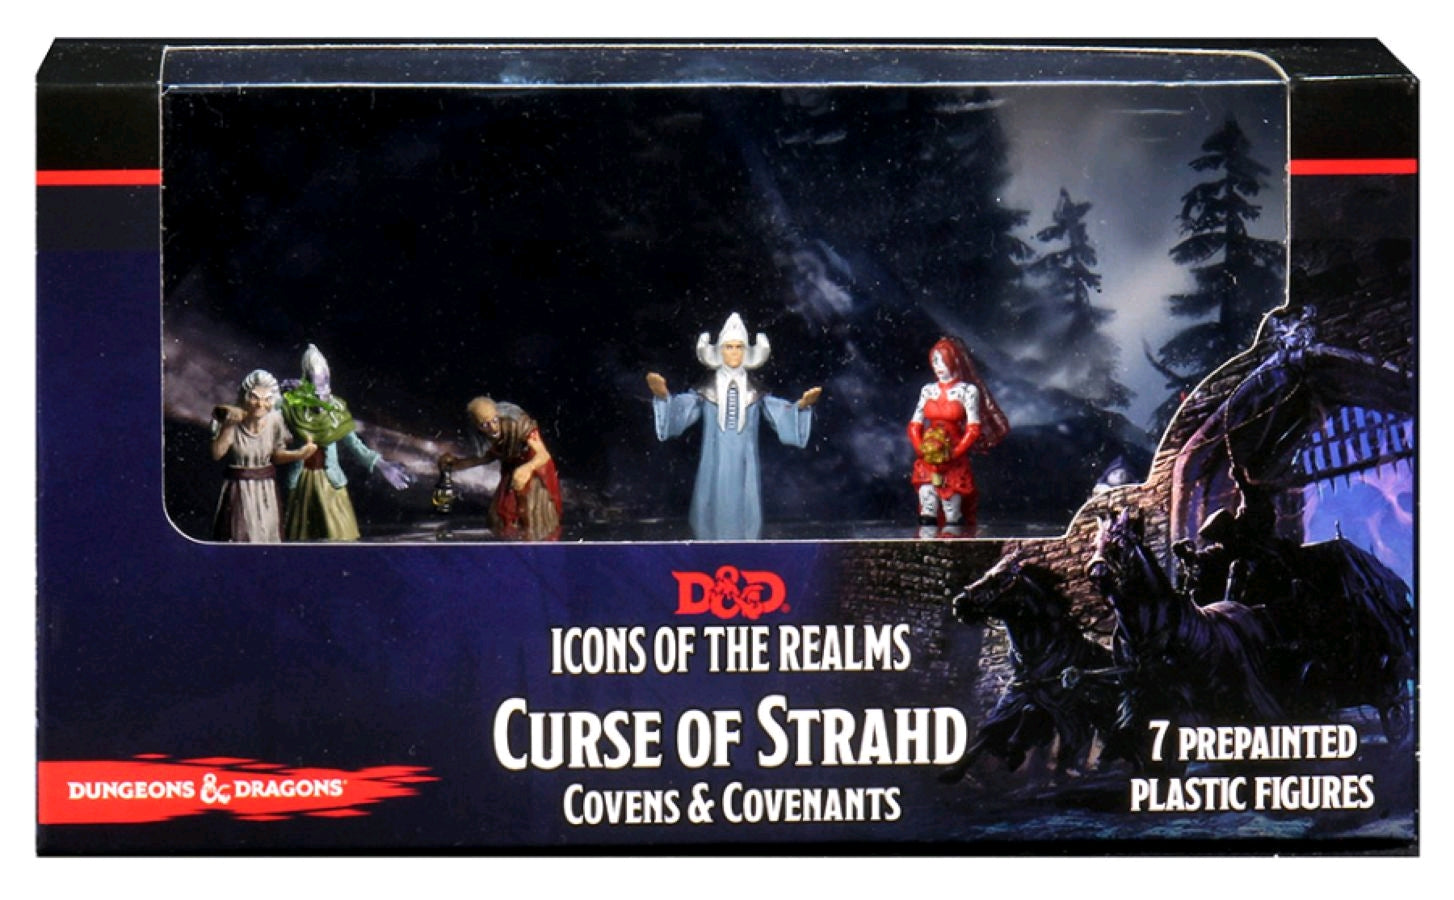 Dungeons & Dragons - Icons of the Realms Curse of Strahd Covens & Covenants Premium Box Set - Ozzie Collectables